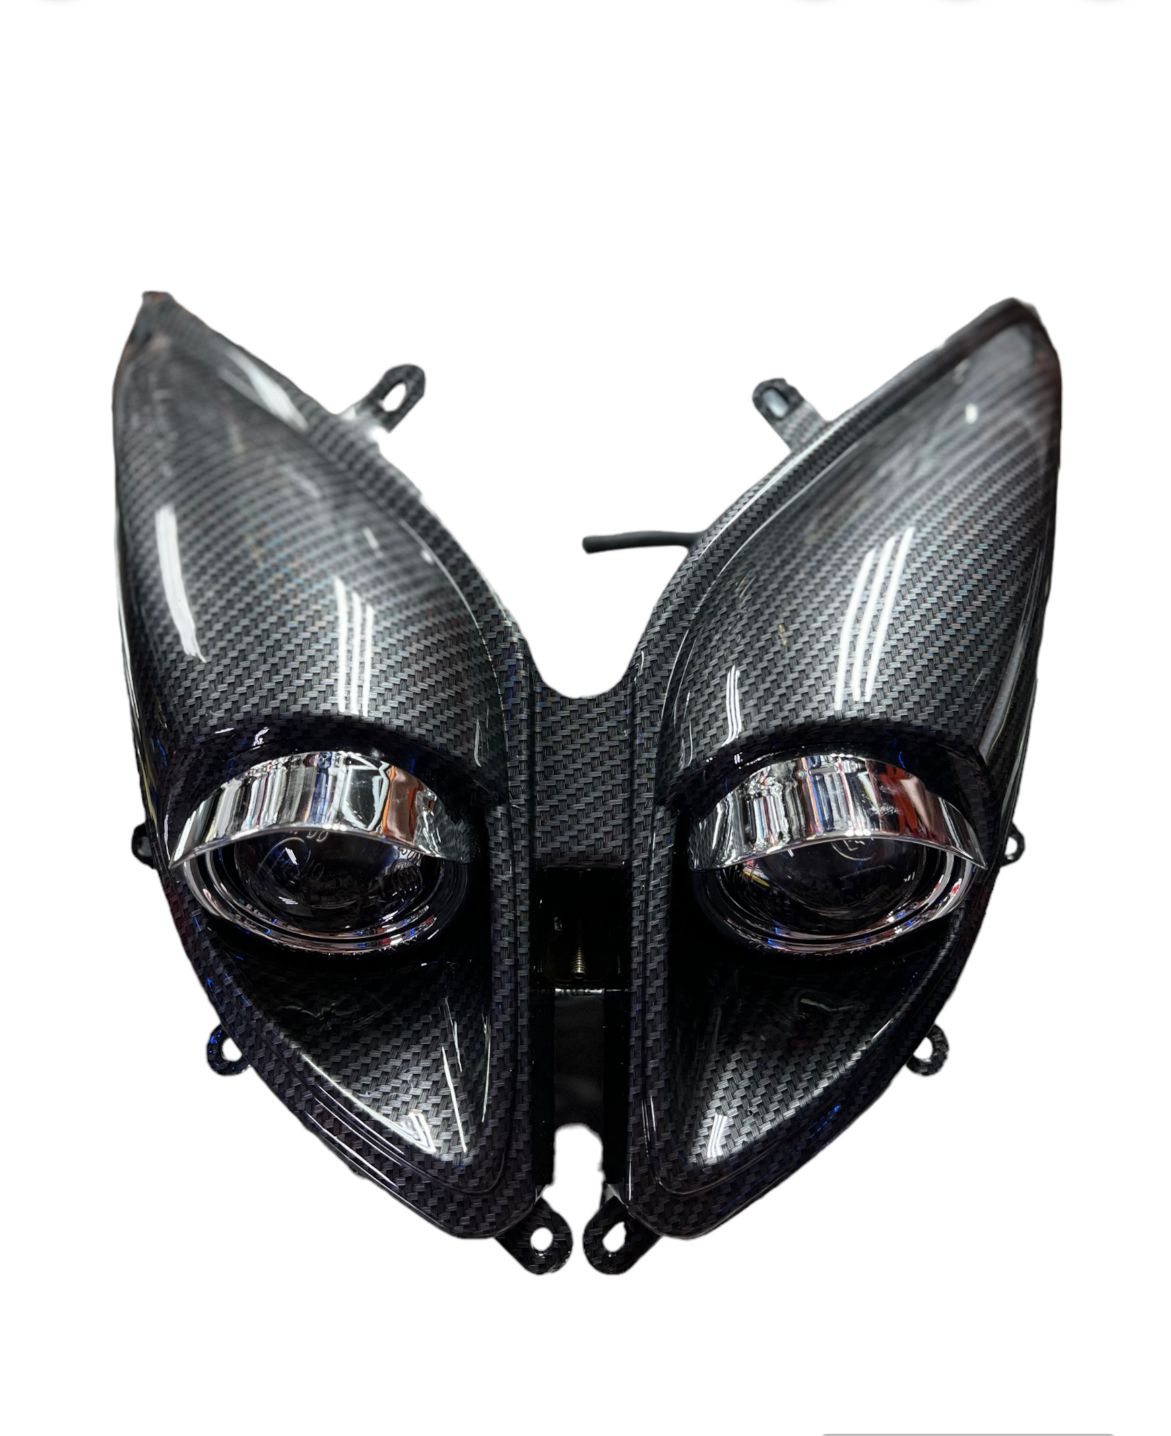 Vento scooter gy6 150cc head light carbon